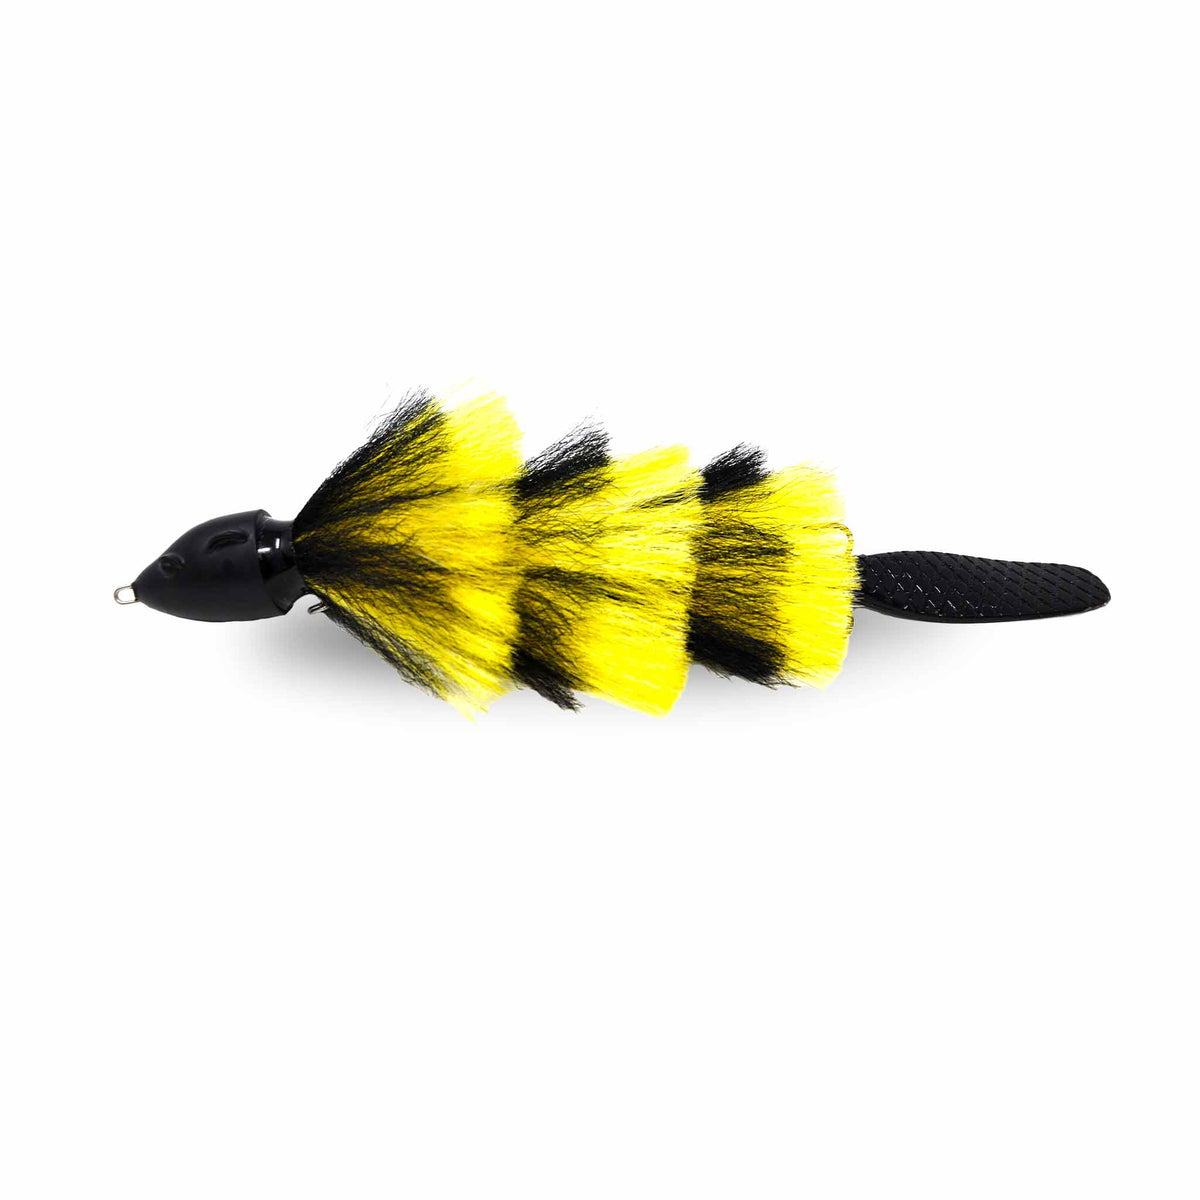 View of Jerk-Glide_Baits Beaver's Baits Baby Beaver XL Jerkbait Yellow / Black available at EZOKO Pike and Musky Shop